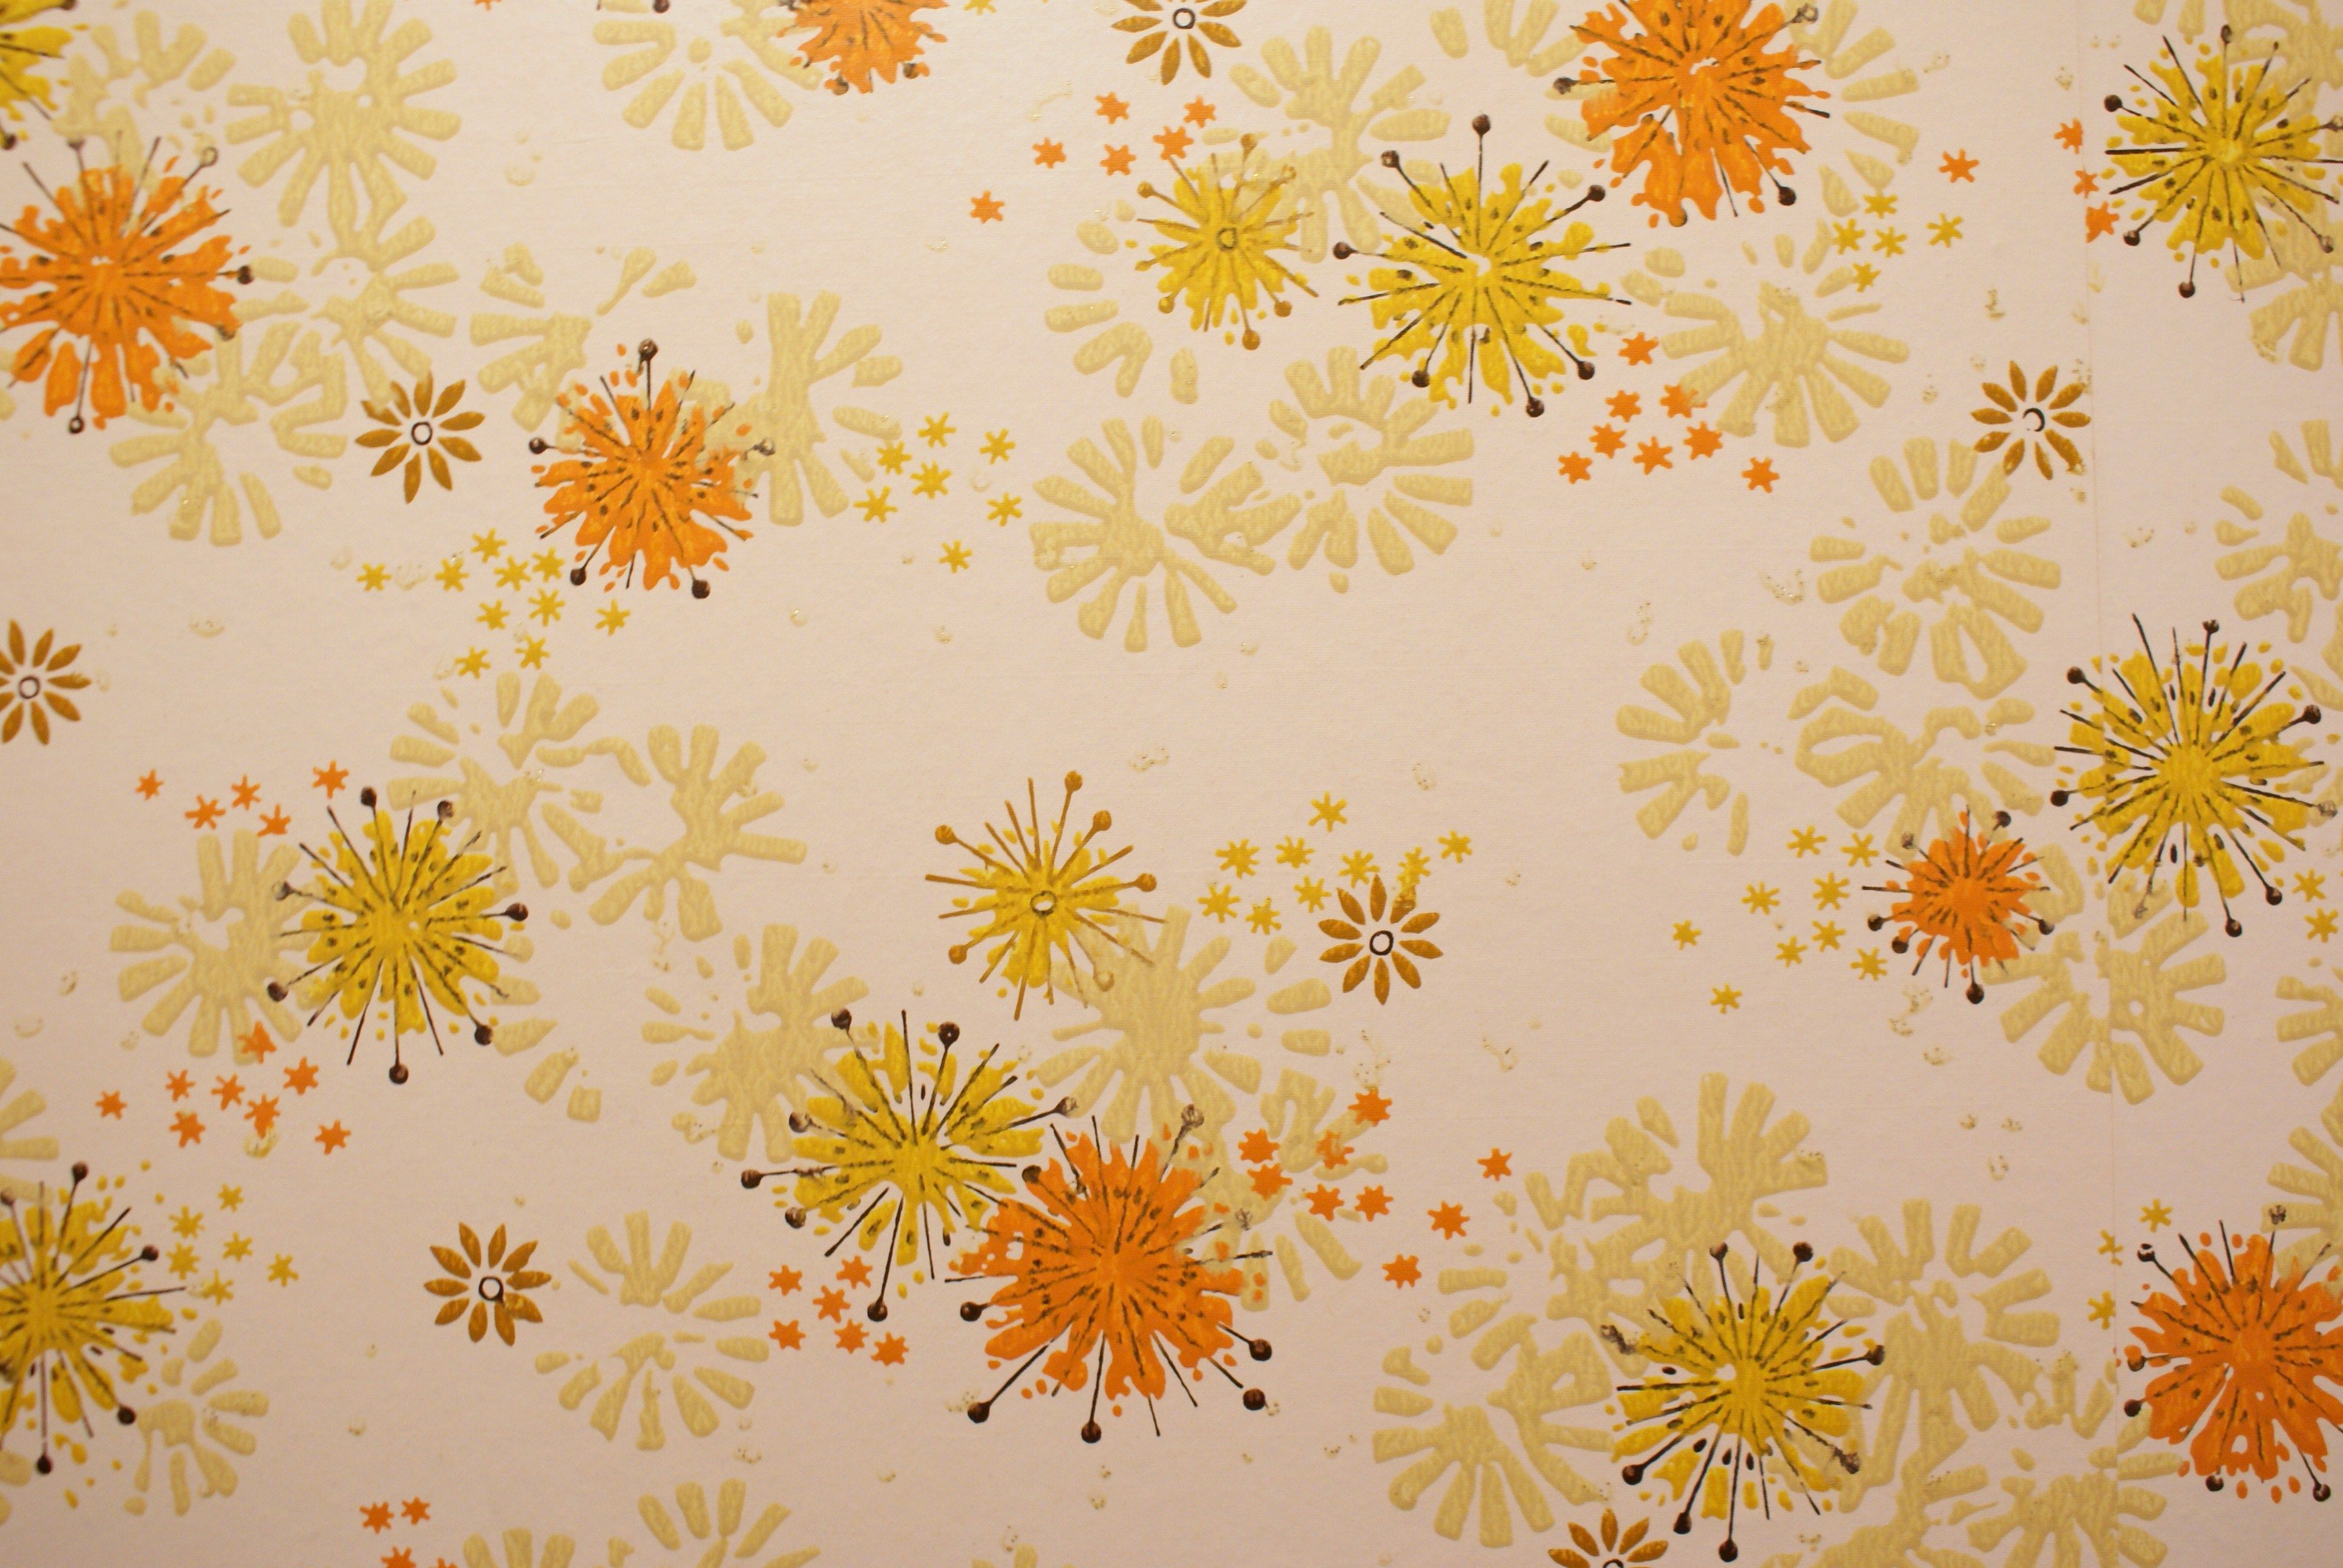 A vintage wallpaper with a pattern of orange and yellow flowers - 70s